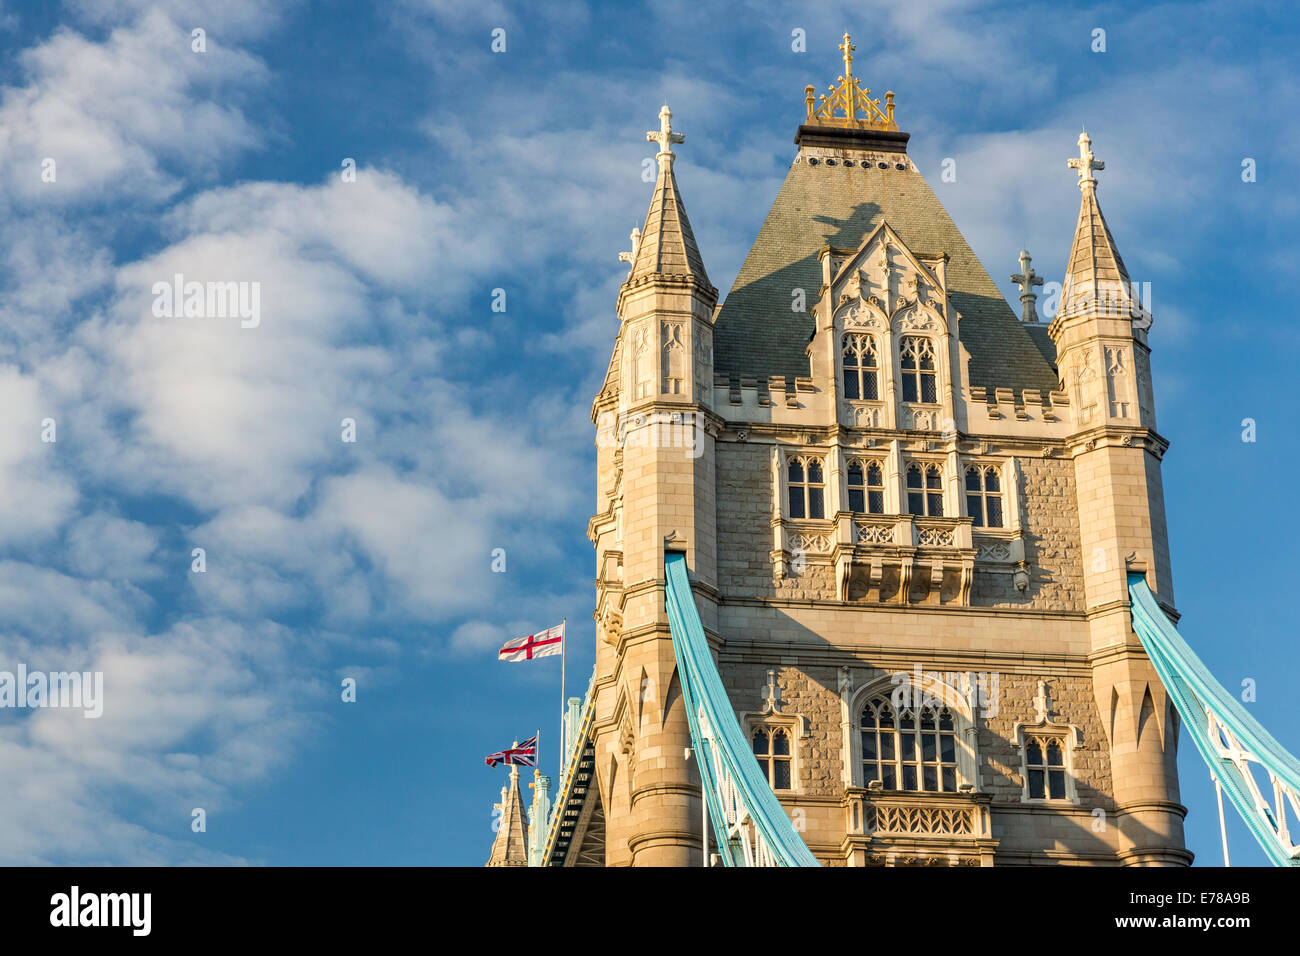 The south tower of Tower Bridge in London, England - in golden evening light. Flags blowing in the wind against blue skies Stock Photo